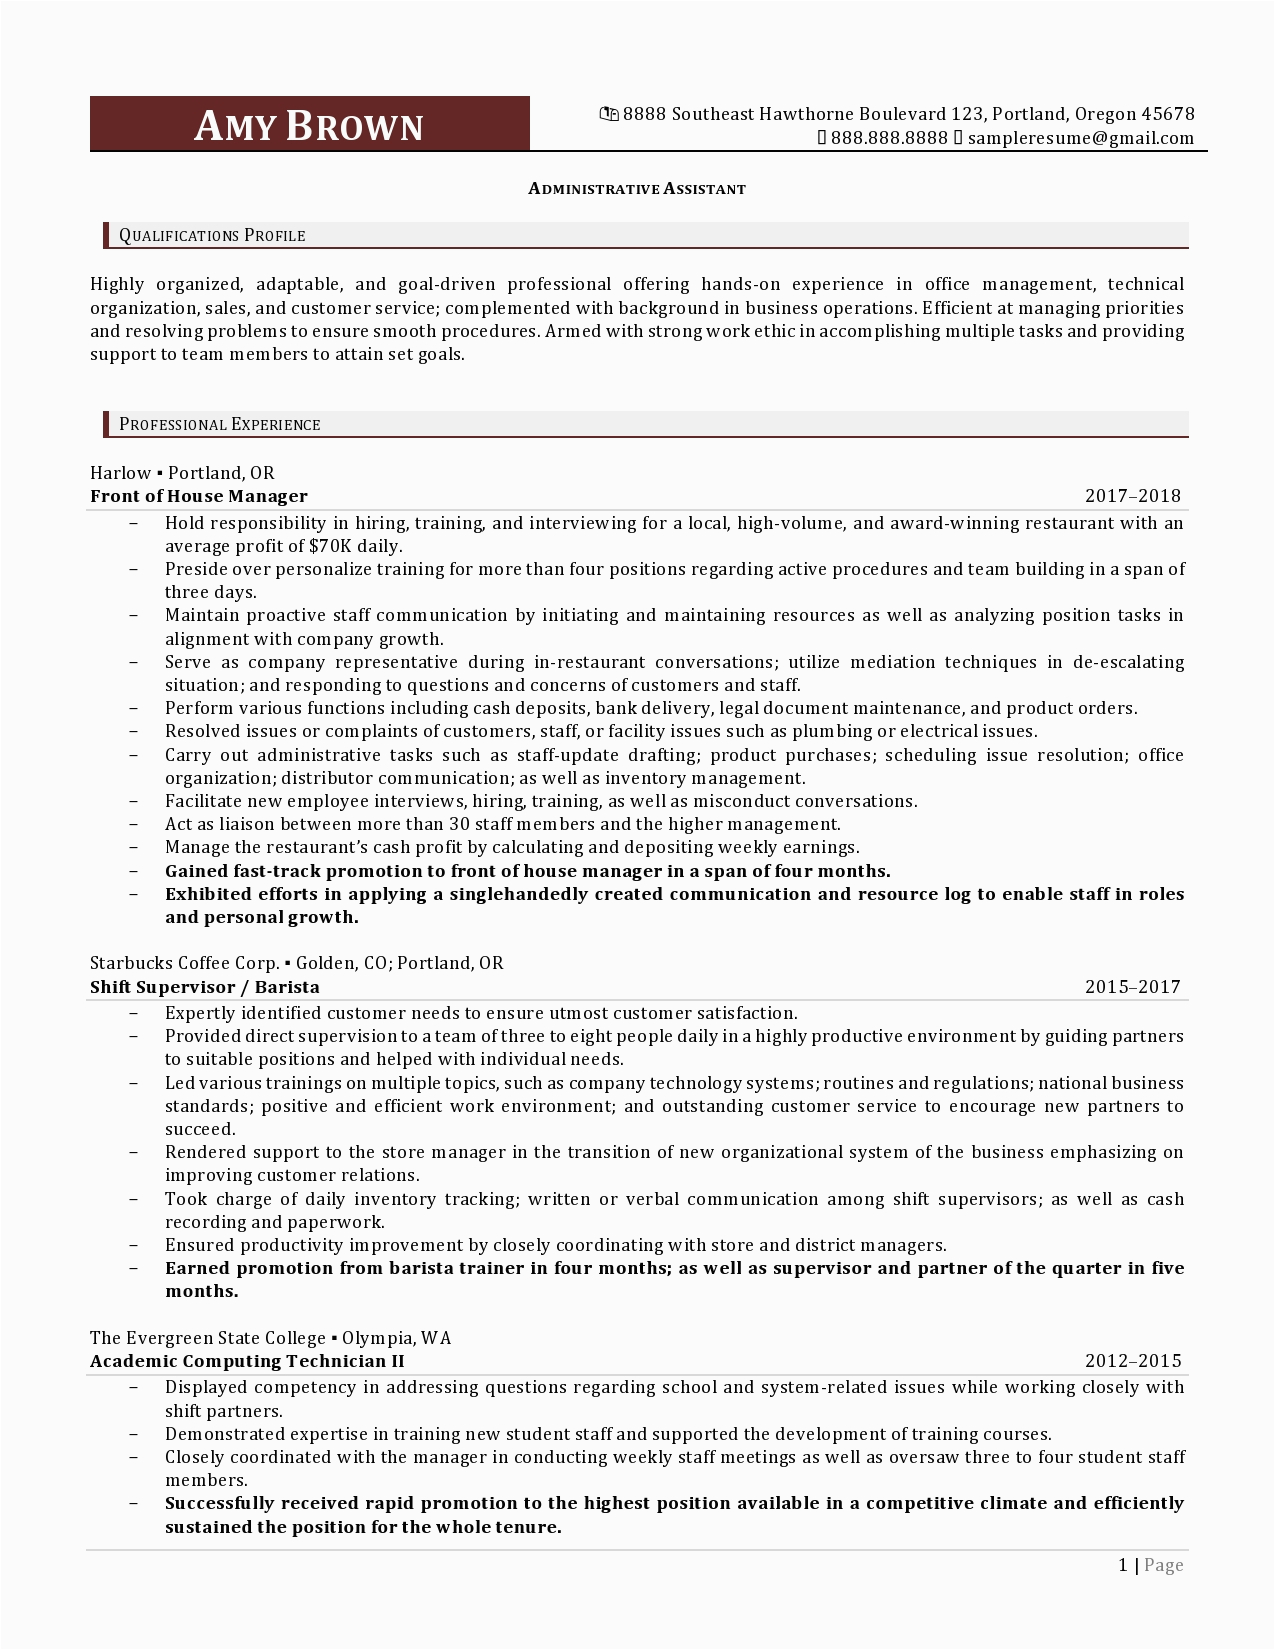 Resume Profile Samples for Admin assistant Administrative assistant Resume Example